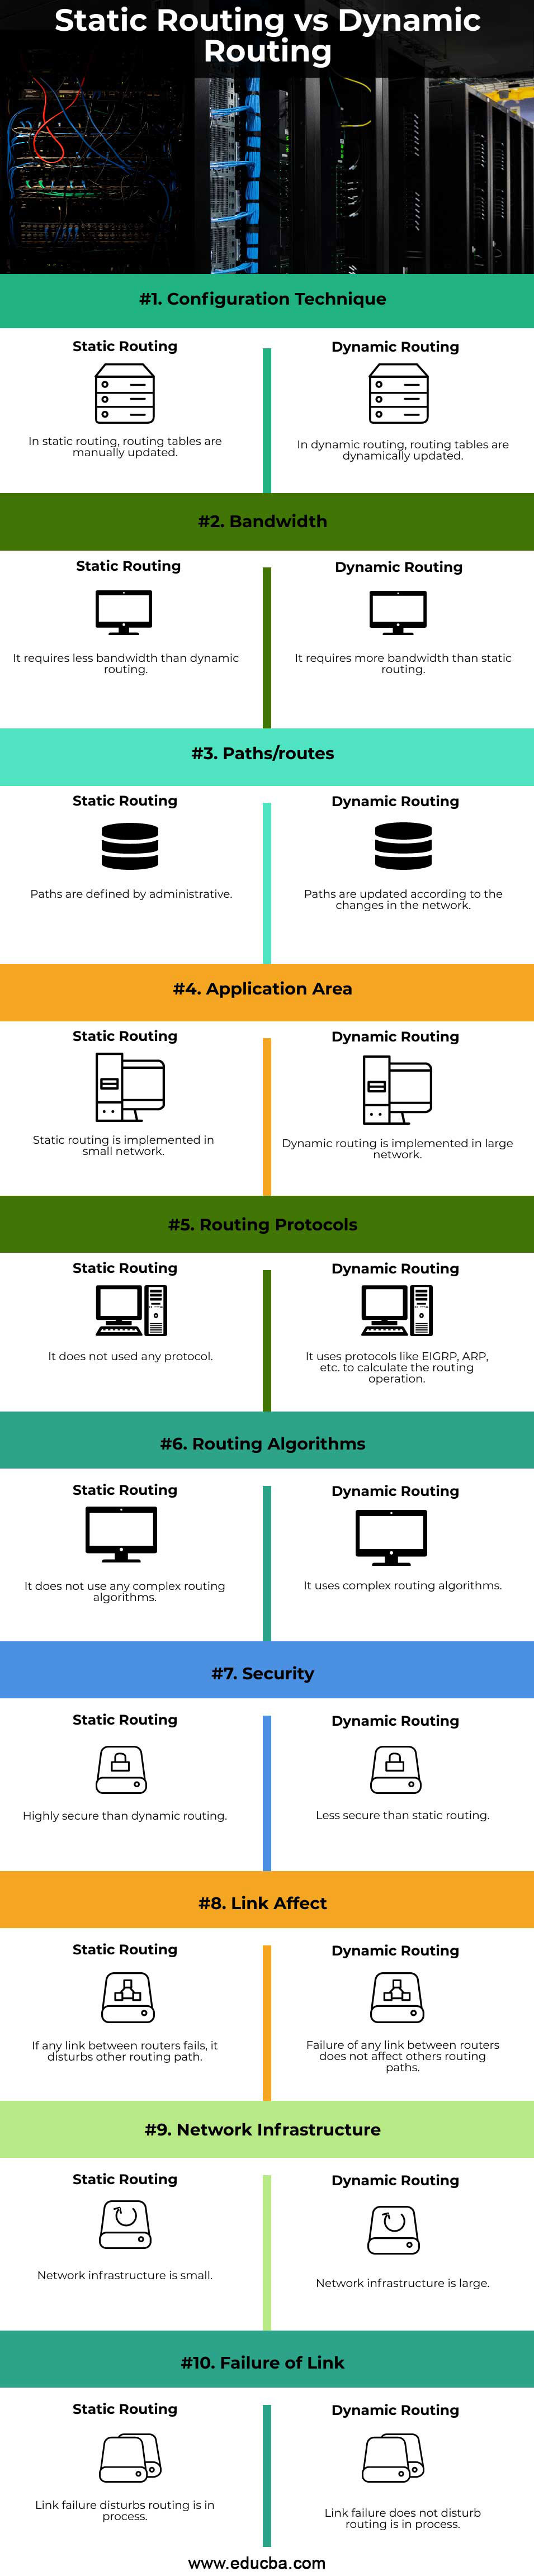 Static-Routing-vs-Dynamic-Routing-info